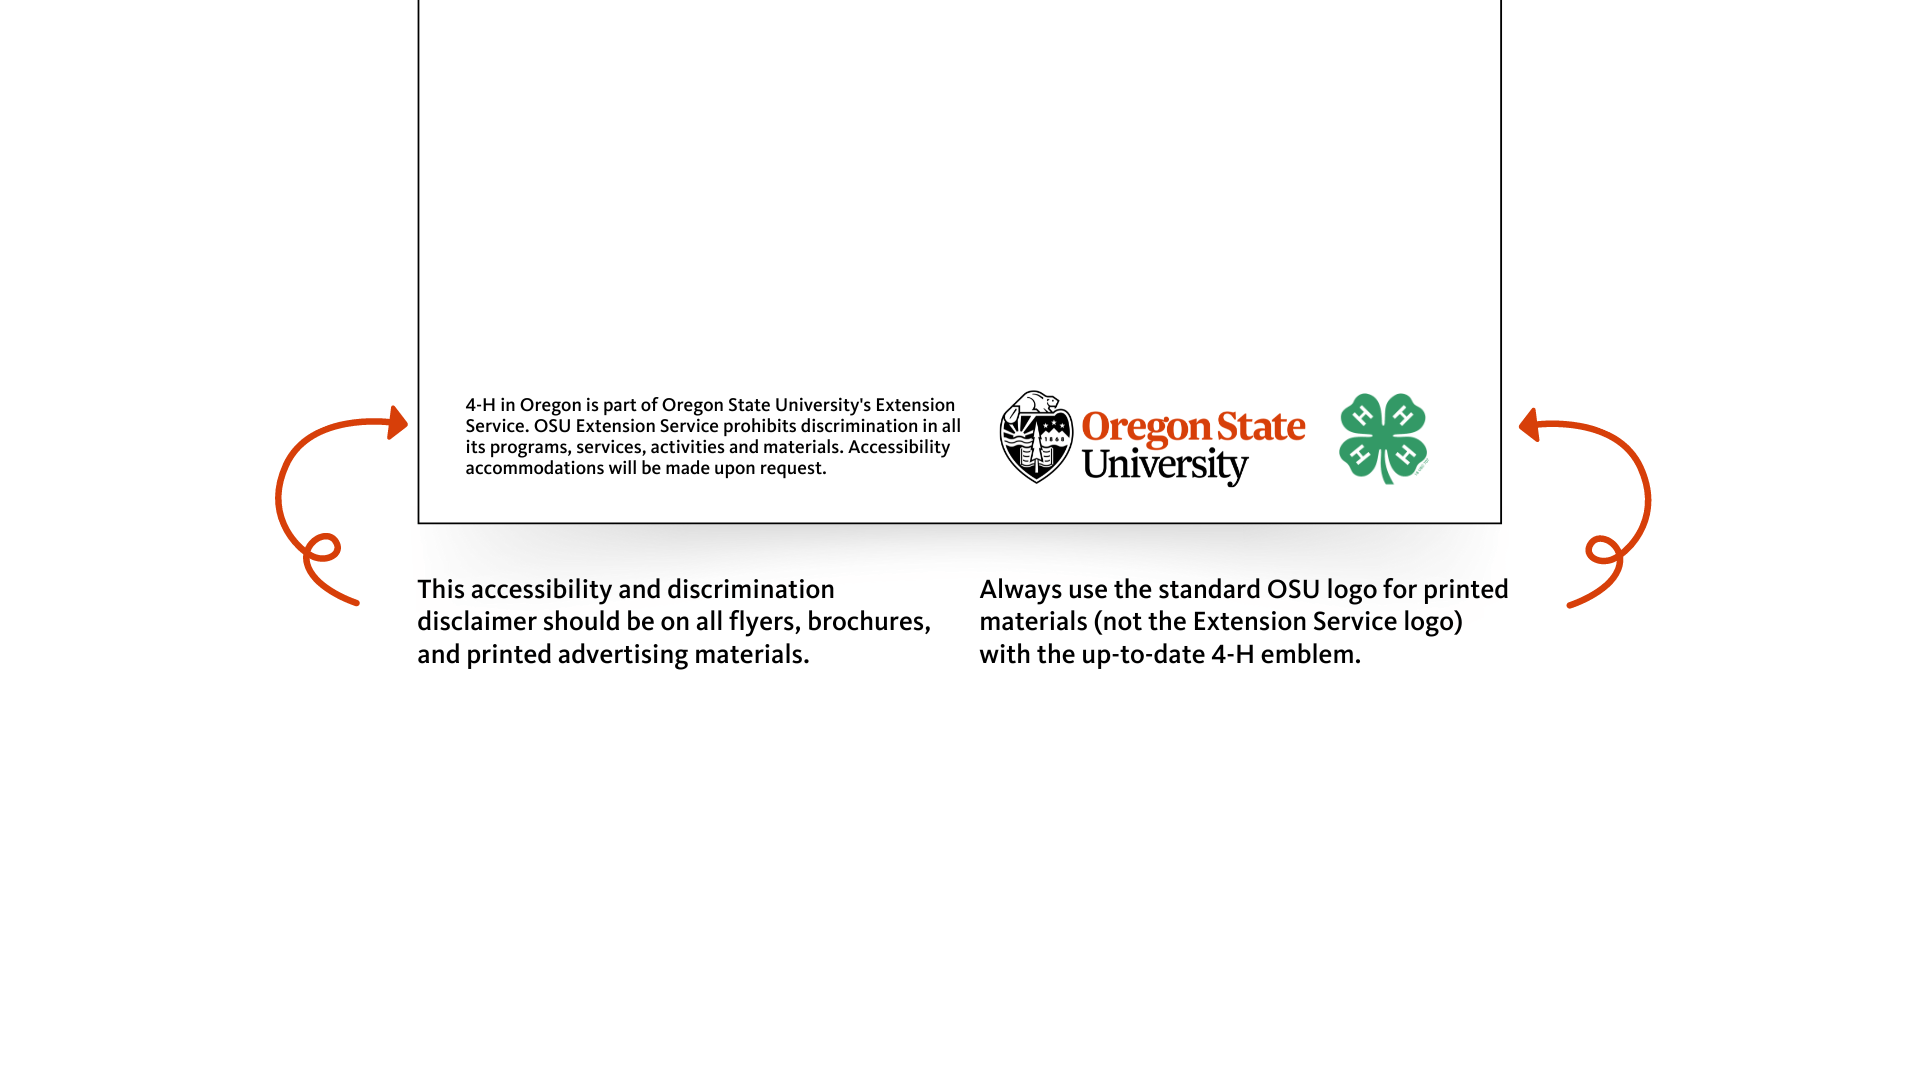 This accessibility and discrimination disclaimer should be on all flyers, brochures, and printed advertising materials. Always use the standard OSU logo for printed materials (not the Extension Service logo) with the up-to-date 4-H emblem.